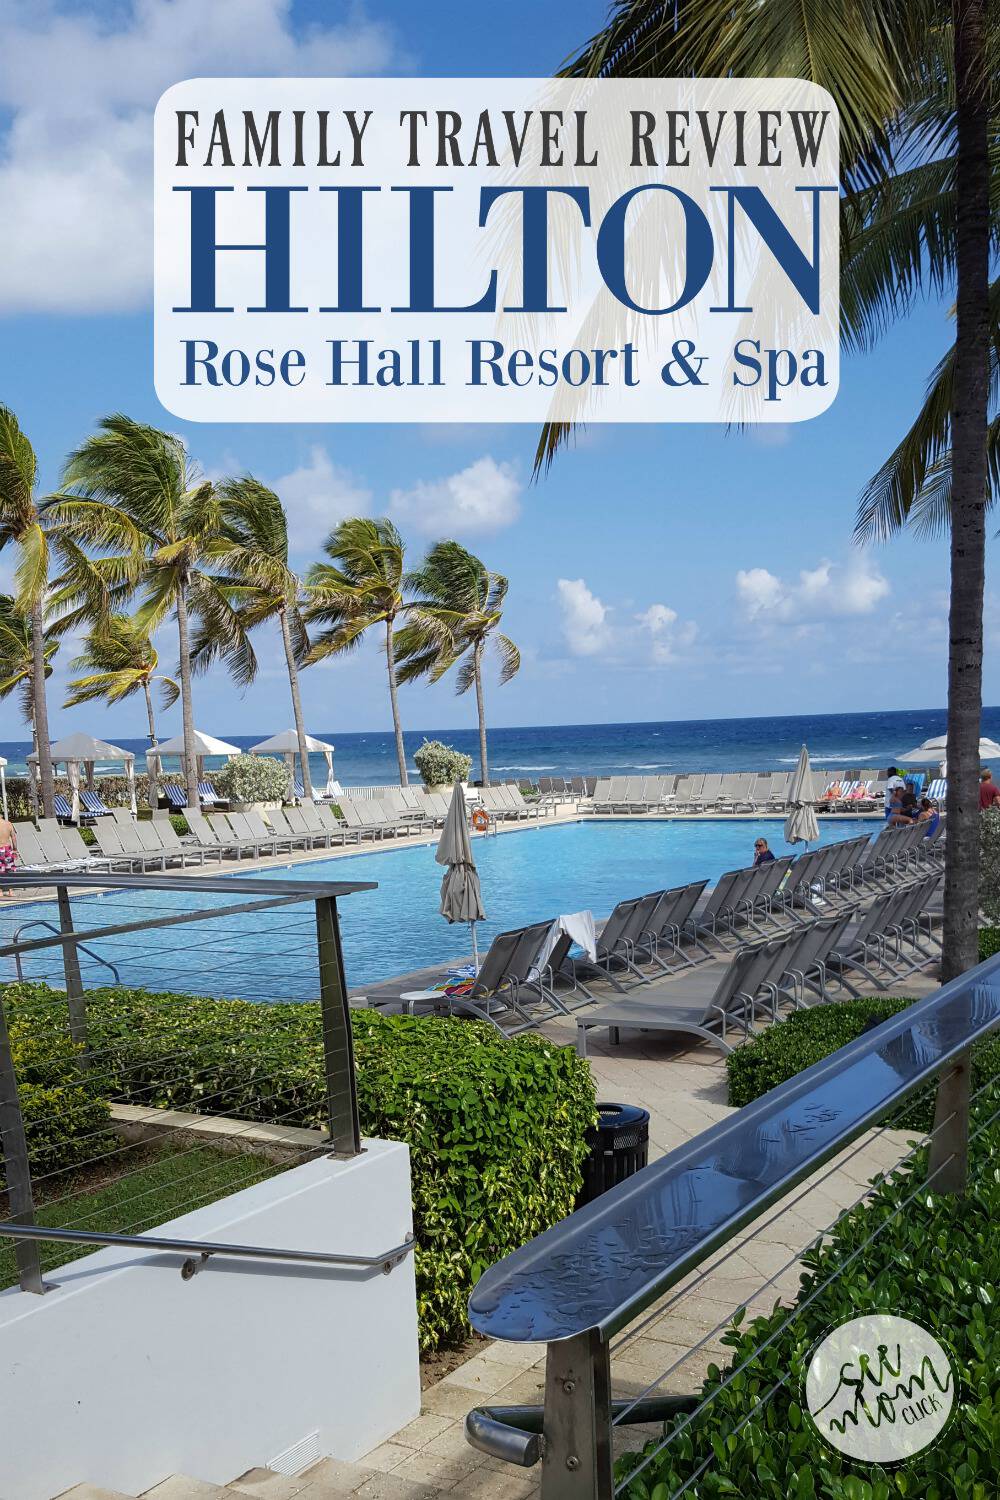 Take the kids on an amazing adventure at the all inclusive family resort, Hilton Rose Hall Resort in Montego Bay Jamaica! Family travel was never so fun!